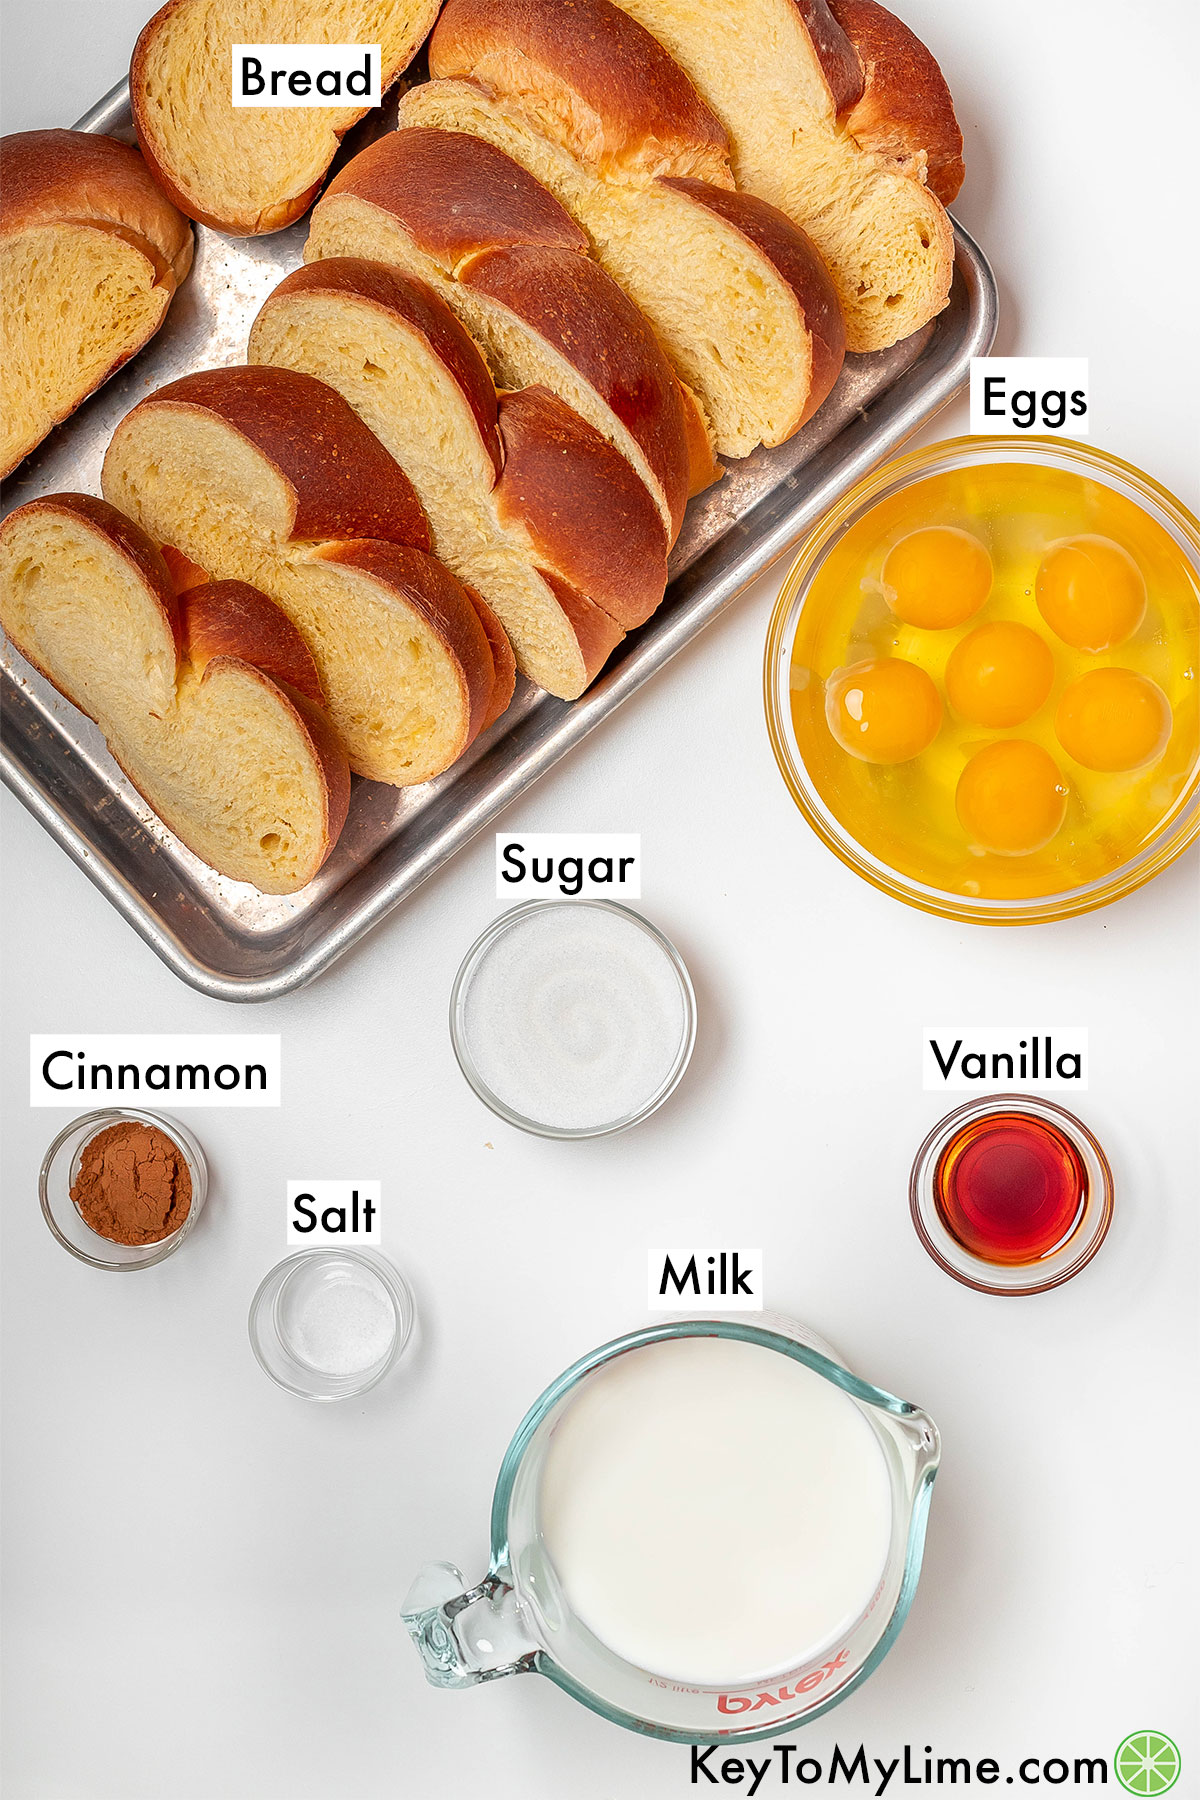 The labeled ingredients for French toast bake.